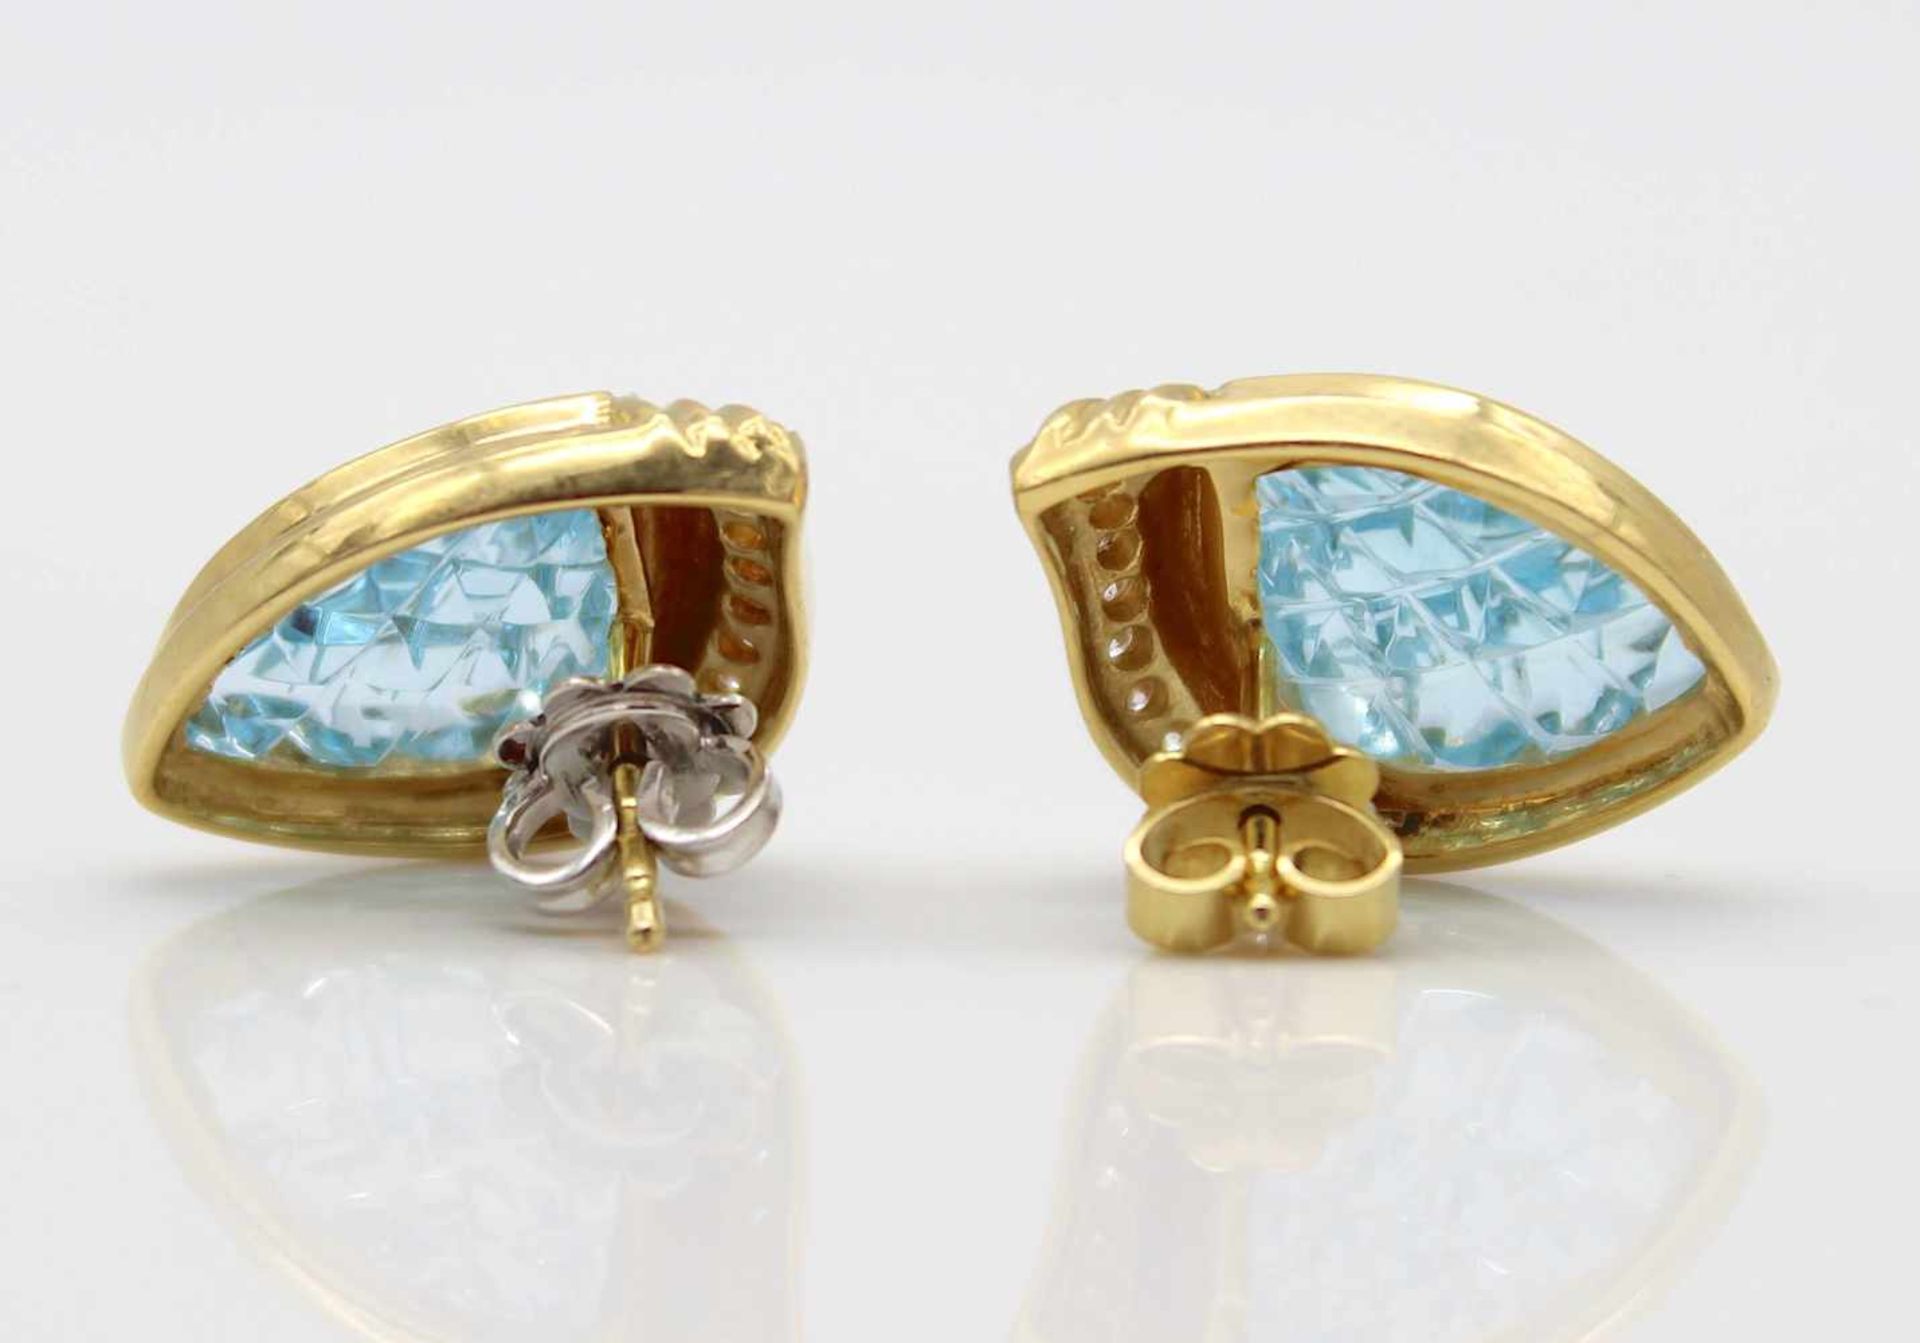 Earrings made of 750 gold with 20 brilliants, total approx. 0.2 ct, high clarity and colour and 2 - Bild 3 aus 3